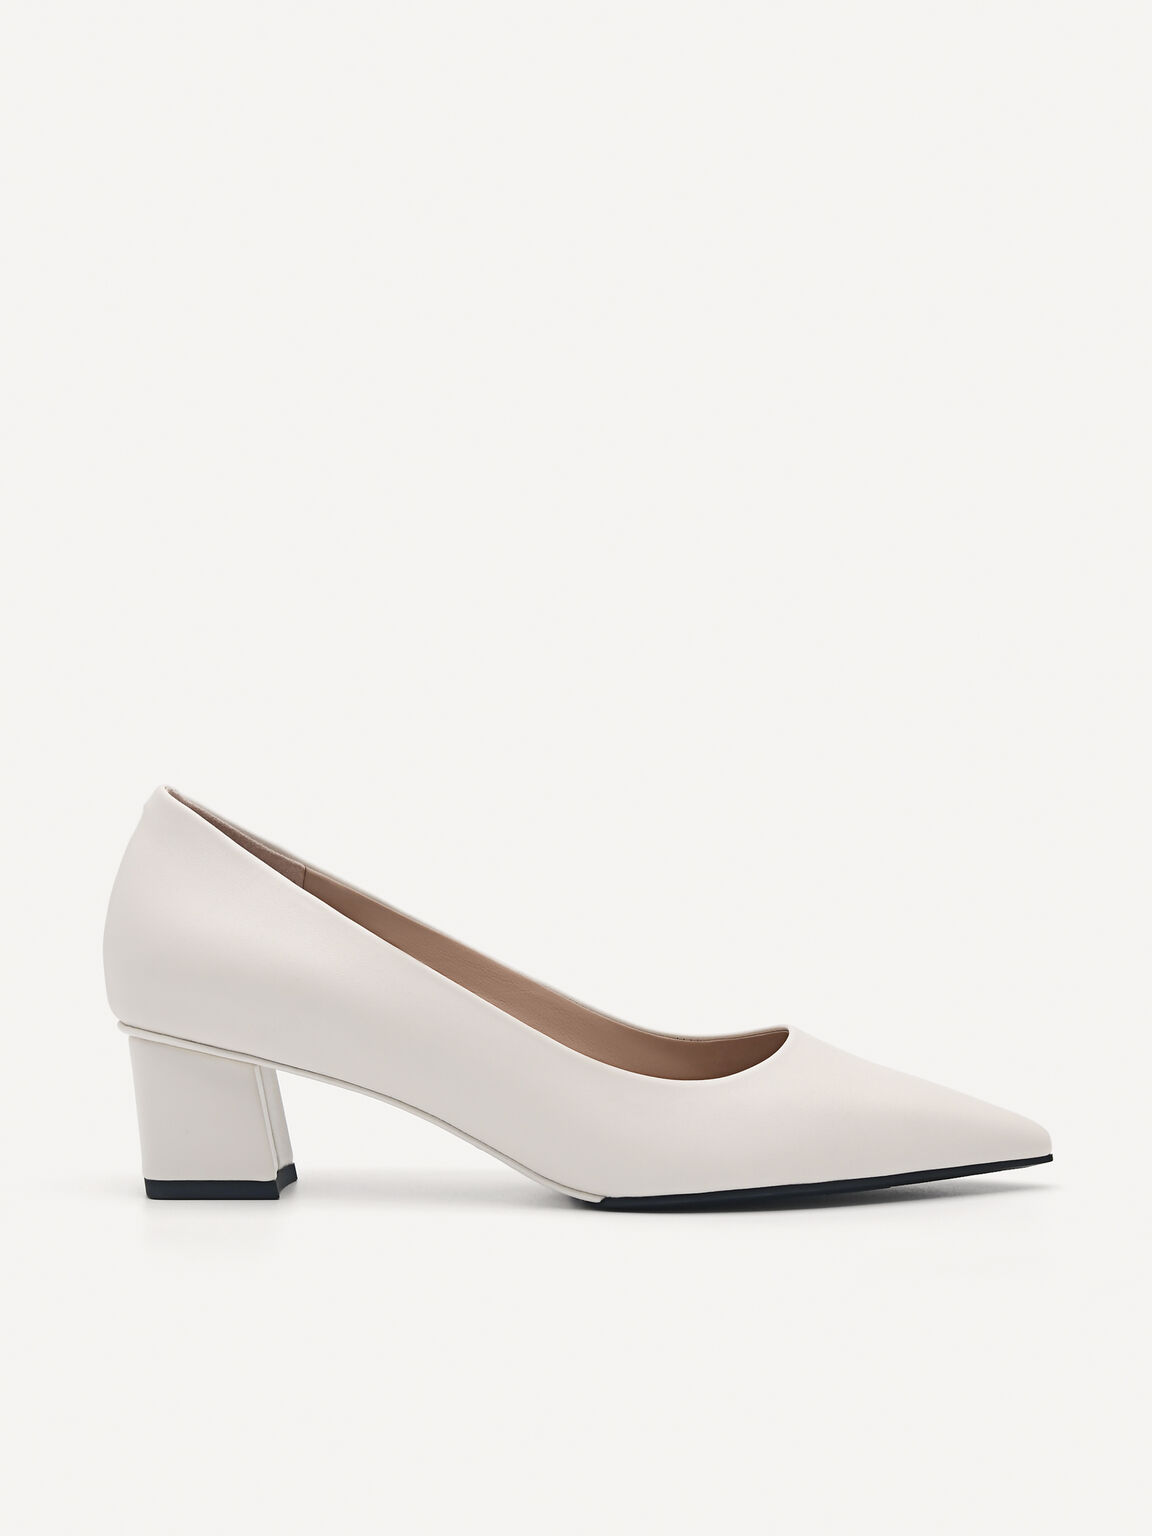 Chalk Ines Leather Pumps - PEDRO SG